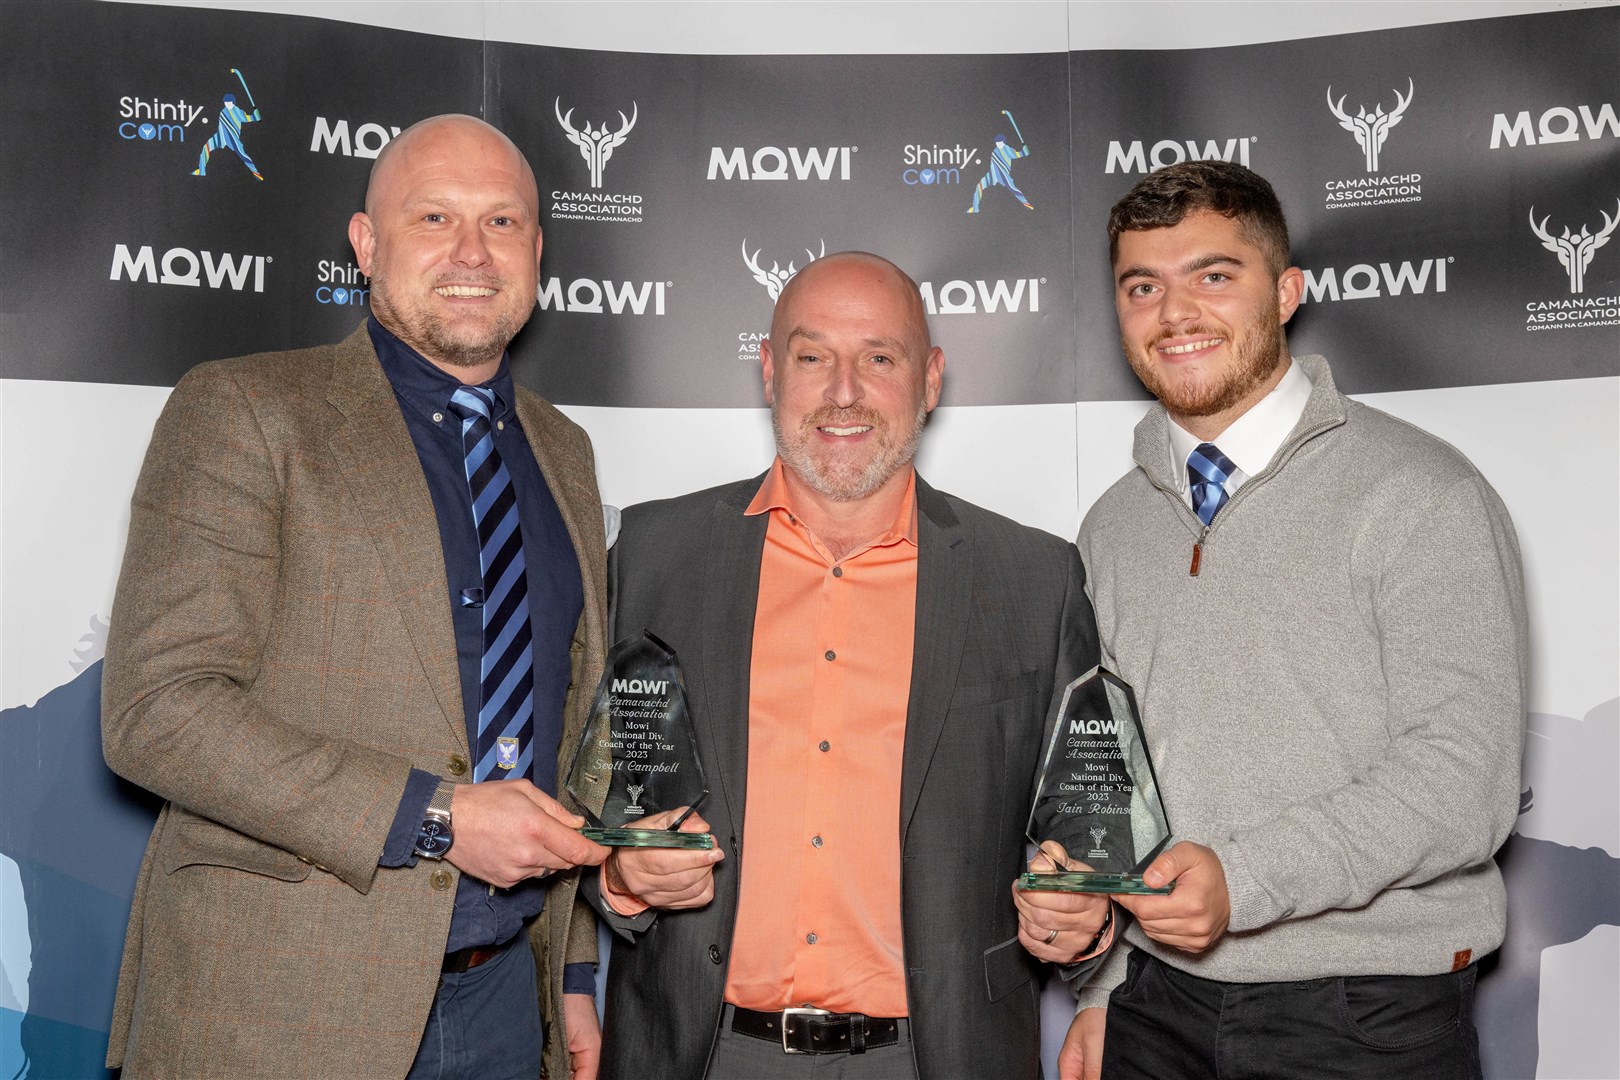 Scott Campbell (left) and Iain Robinson (right) with Ian Roberts at the Mowi Shinty Awards.